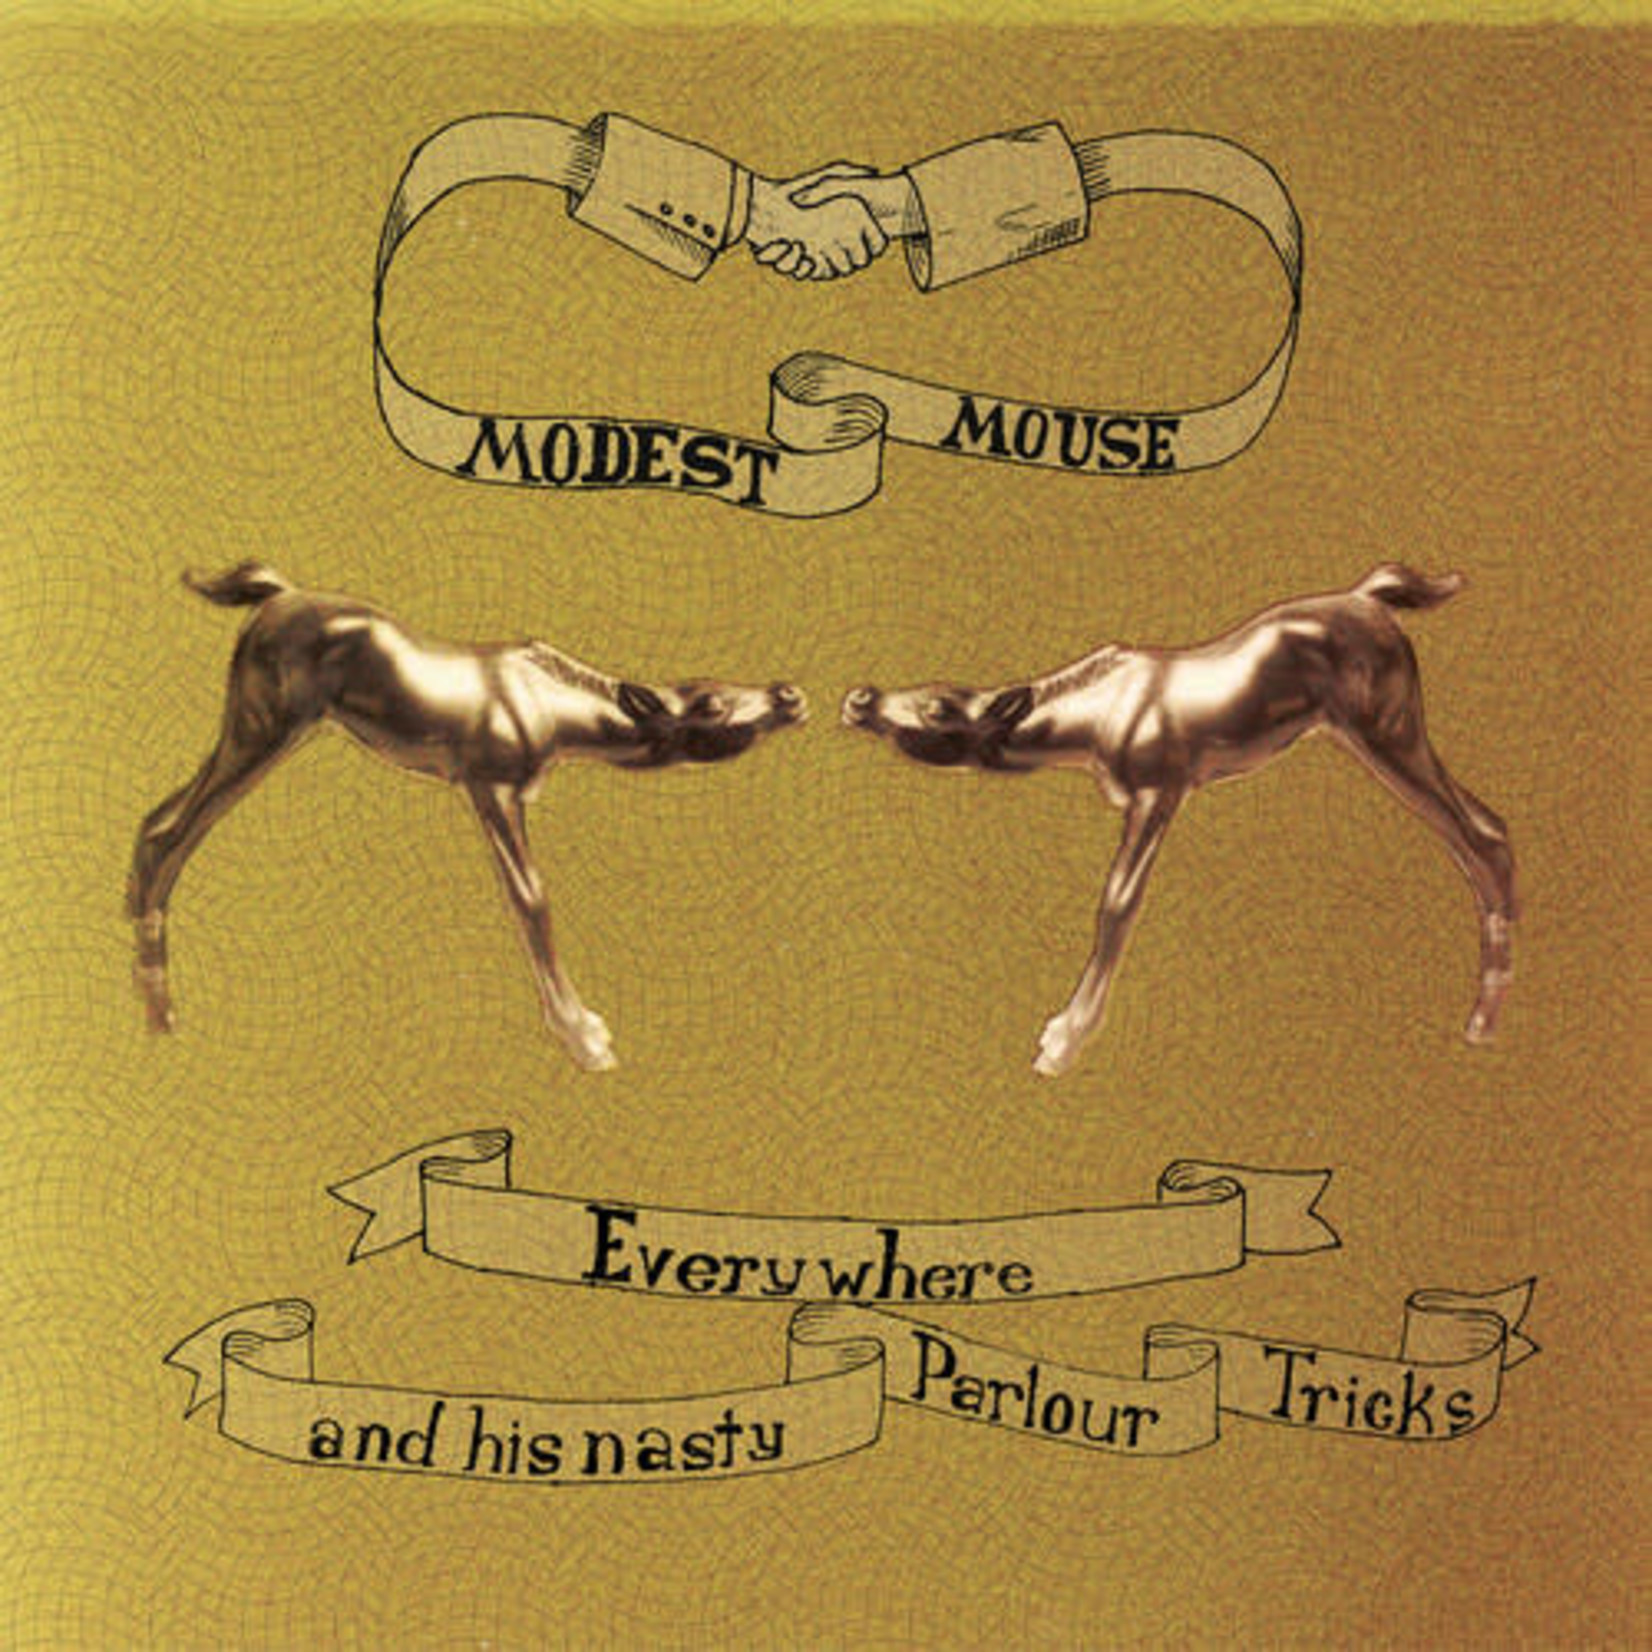 Sony Modest Mouse - Everywhere and his Nasty Parlour Tricks (LP)